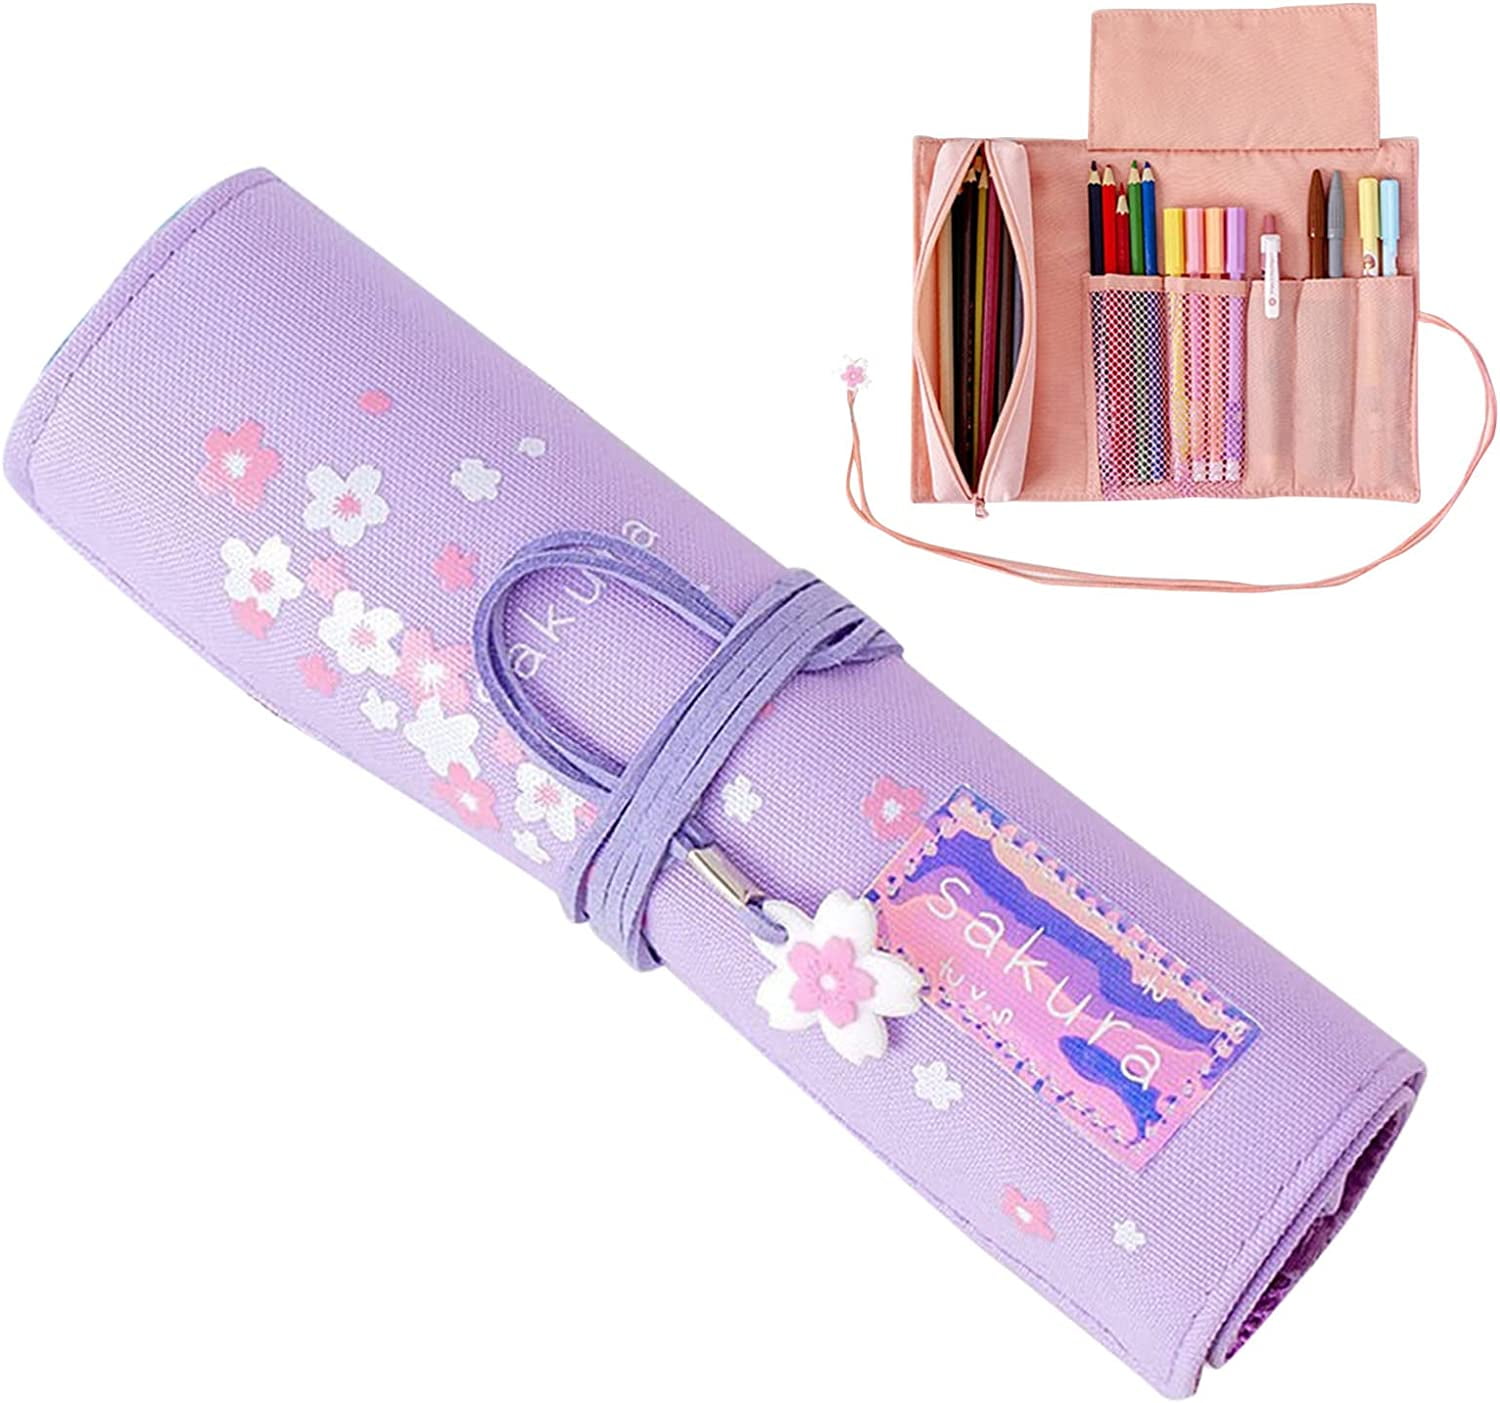 Pop-Up Pencil Pouch-God's Girl (7.5 inch x 4.75 inch)